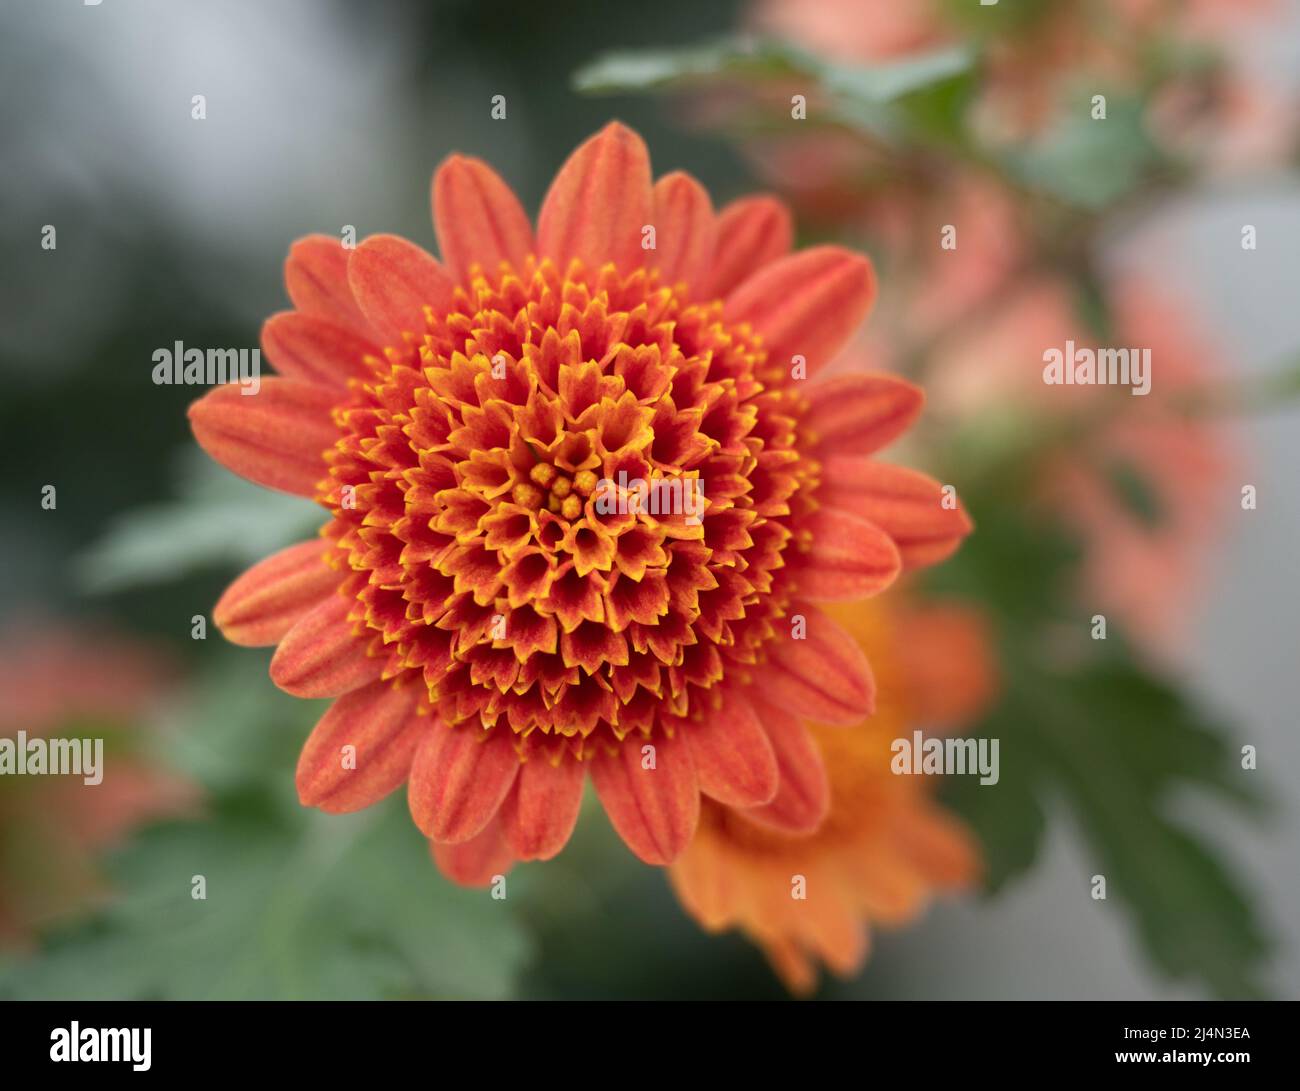 Close up of a salmon-colored chrysanthemum with short ray flowers or petals and multiple disc flowers. Photographed with a shallow depth of field. Stock Photo